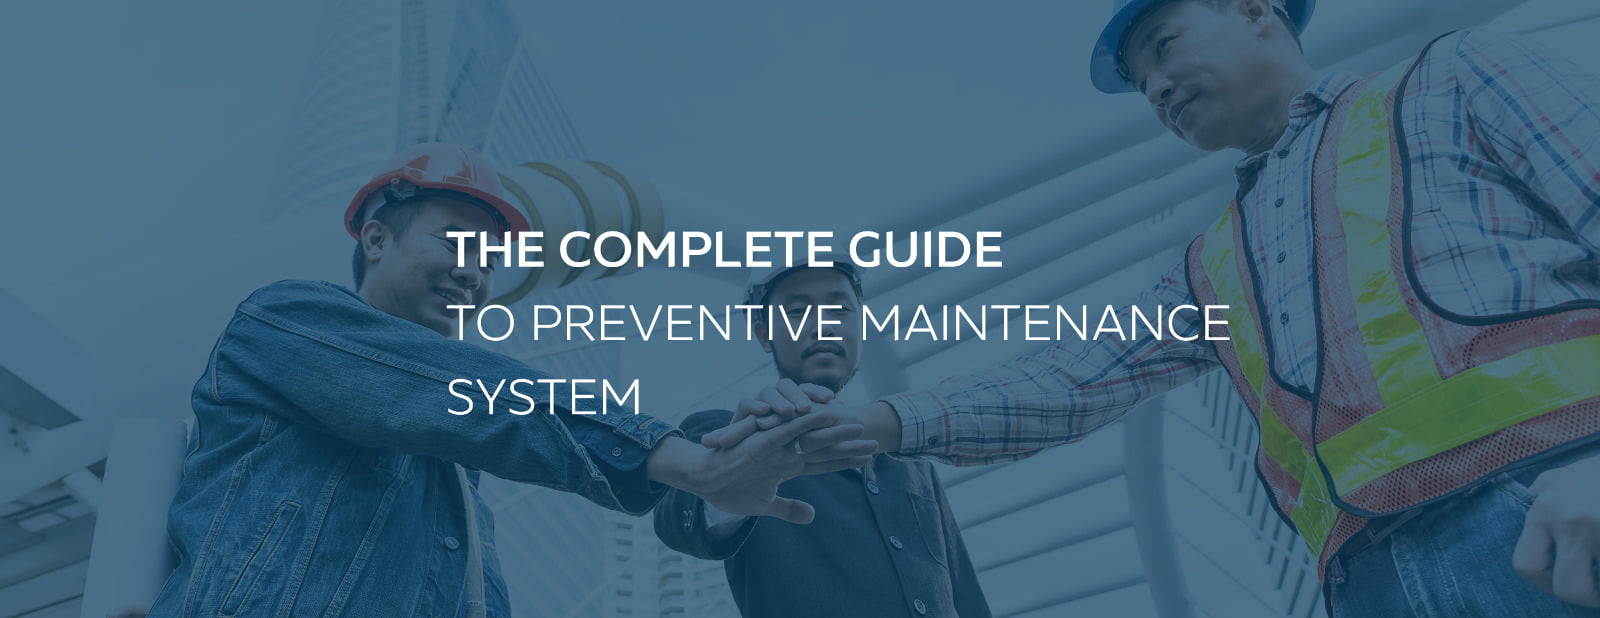 The Complete Guide to Preventive Maintenance System